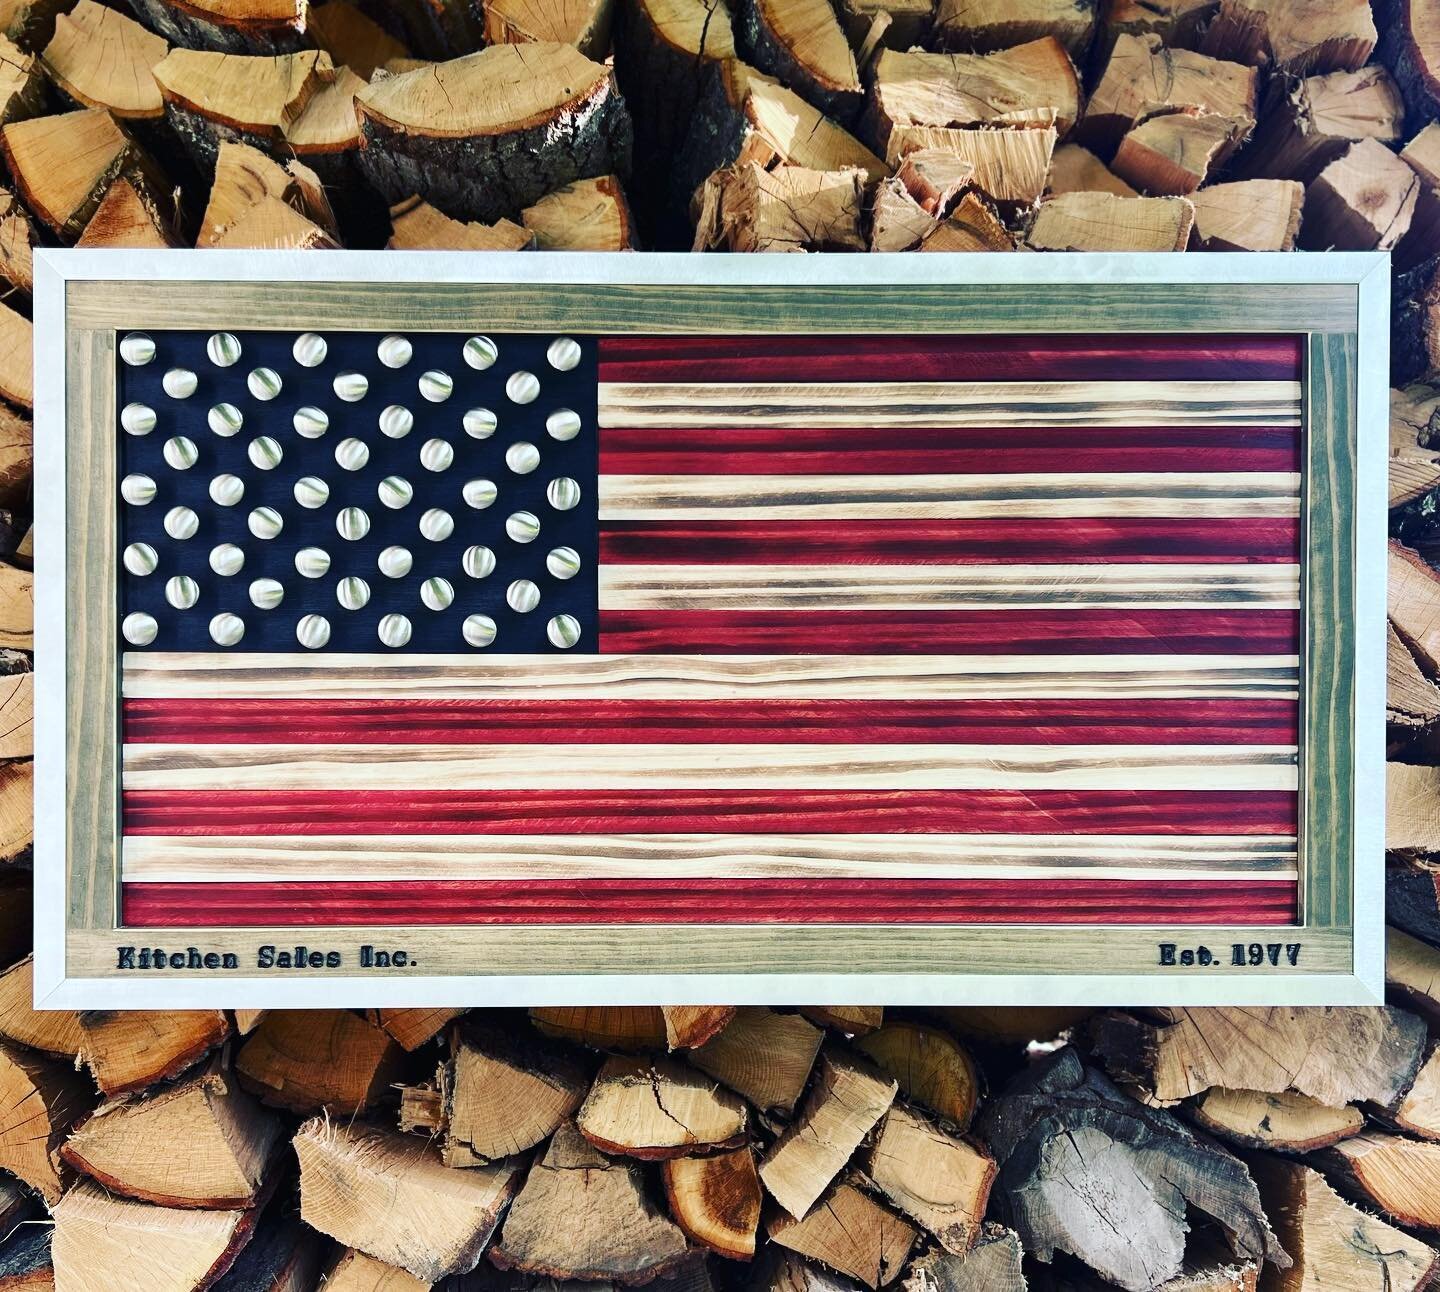 Custom size and cabinet knobs as stars for a cabinet company! 🇺🇸😁🇺🇸 www.shoveltownflag.com